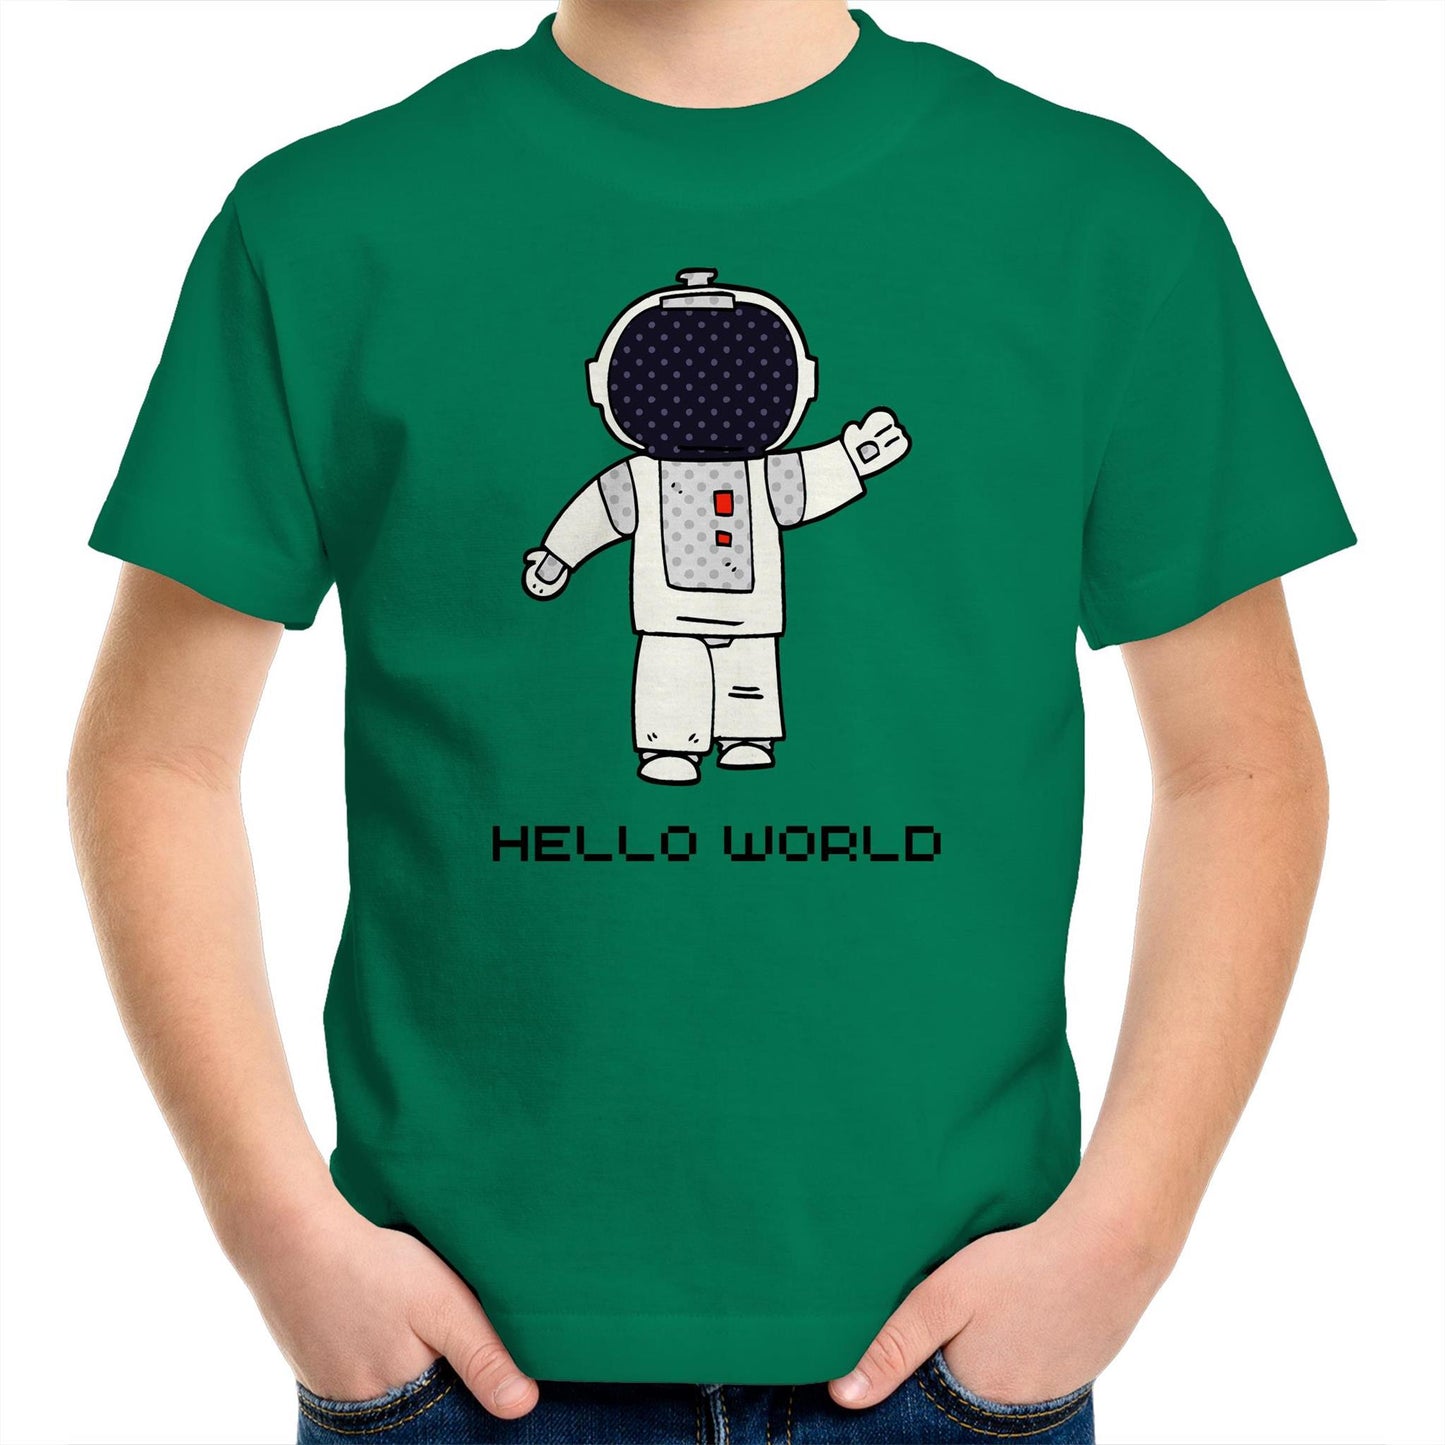 Astronaut, Hello World - Kids Youth T-Shirt Kelly Green Kids Youth T-shirt Space